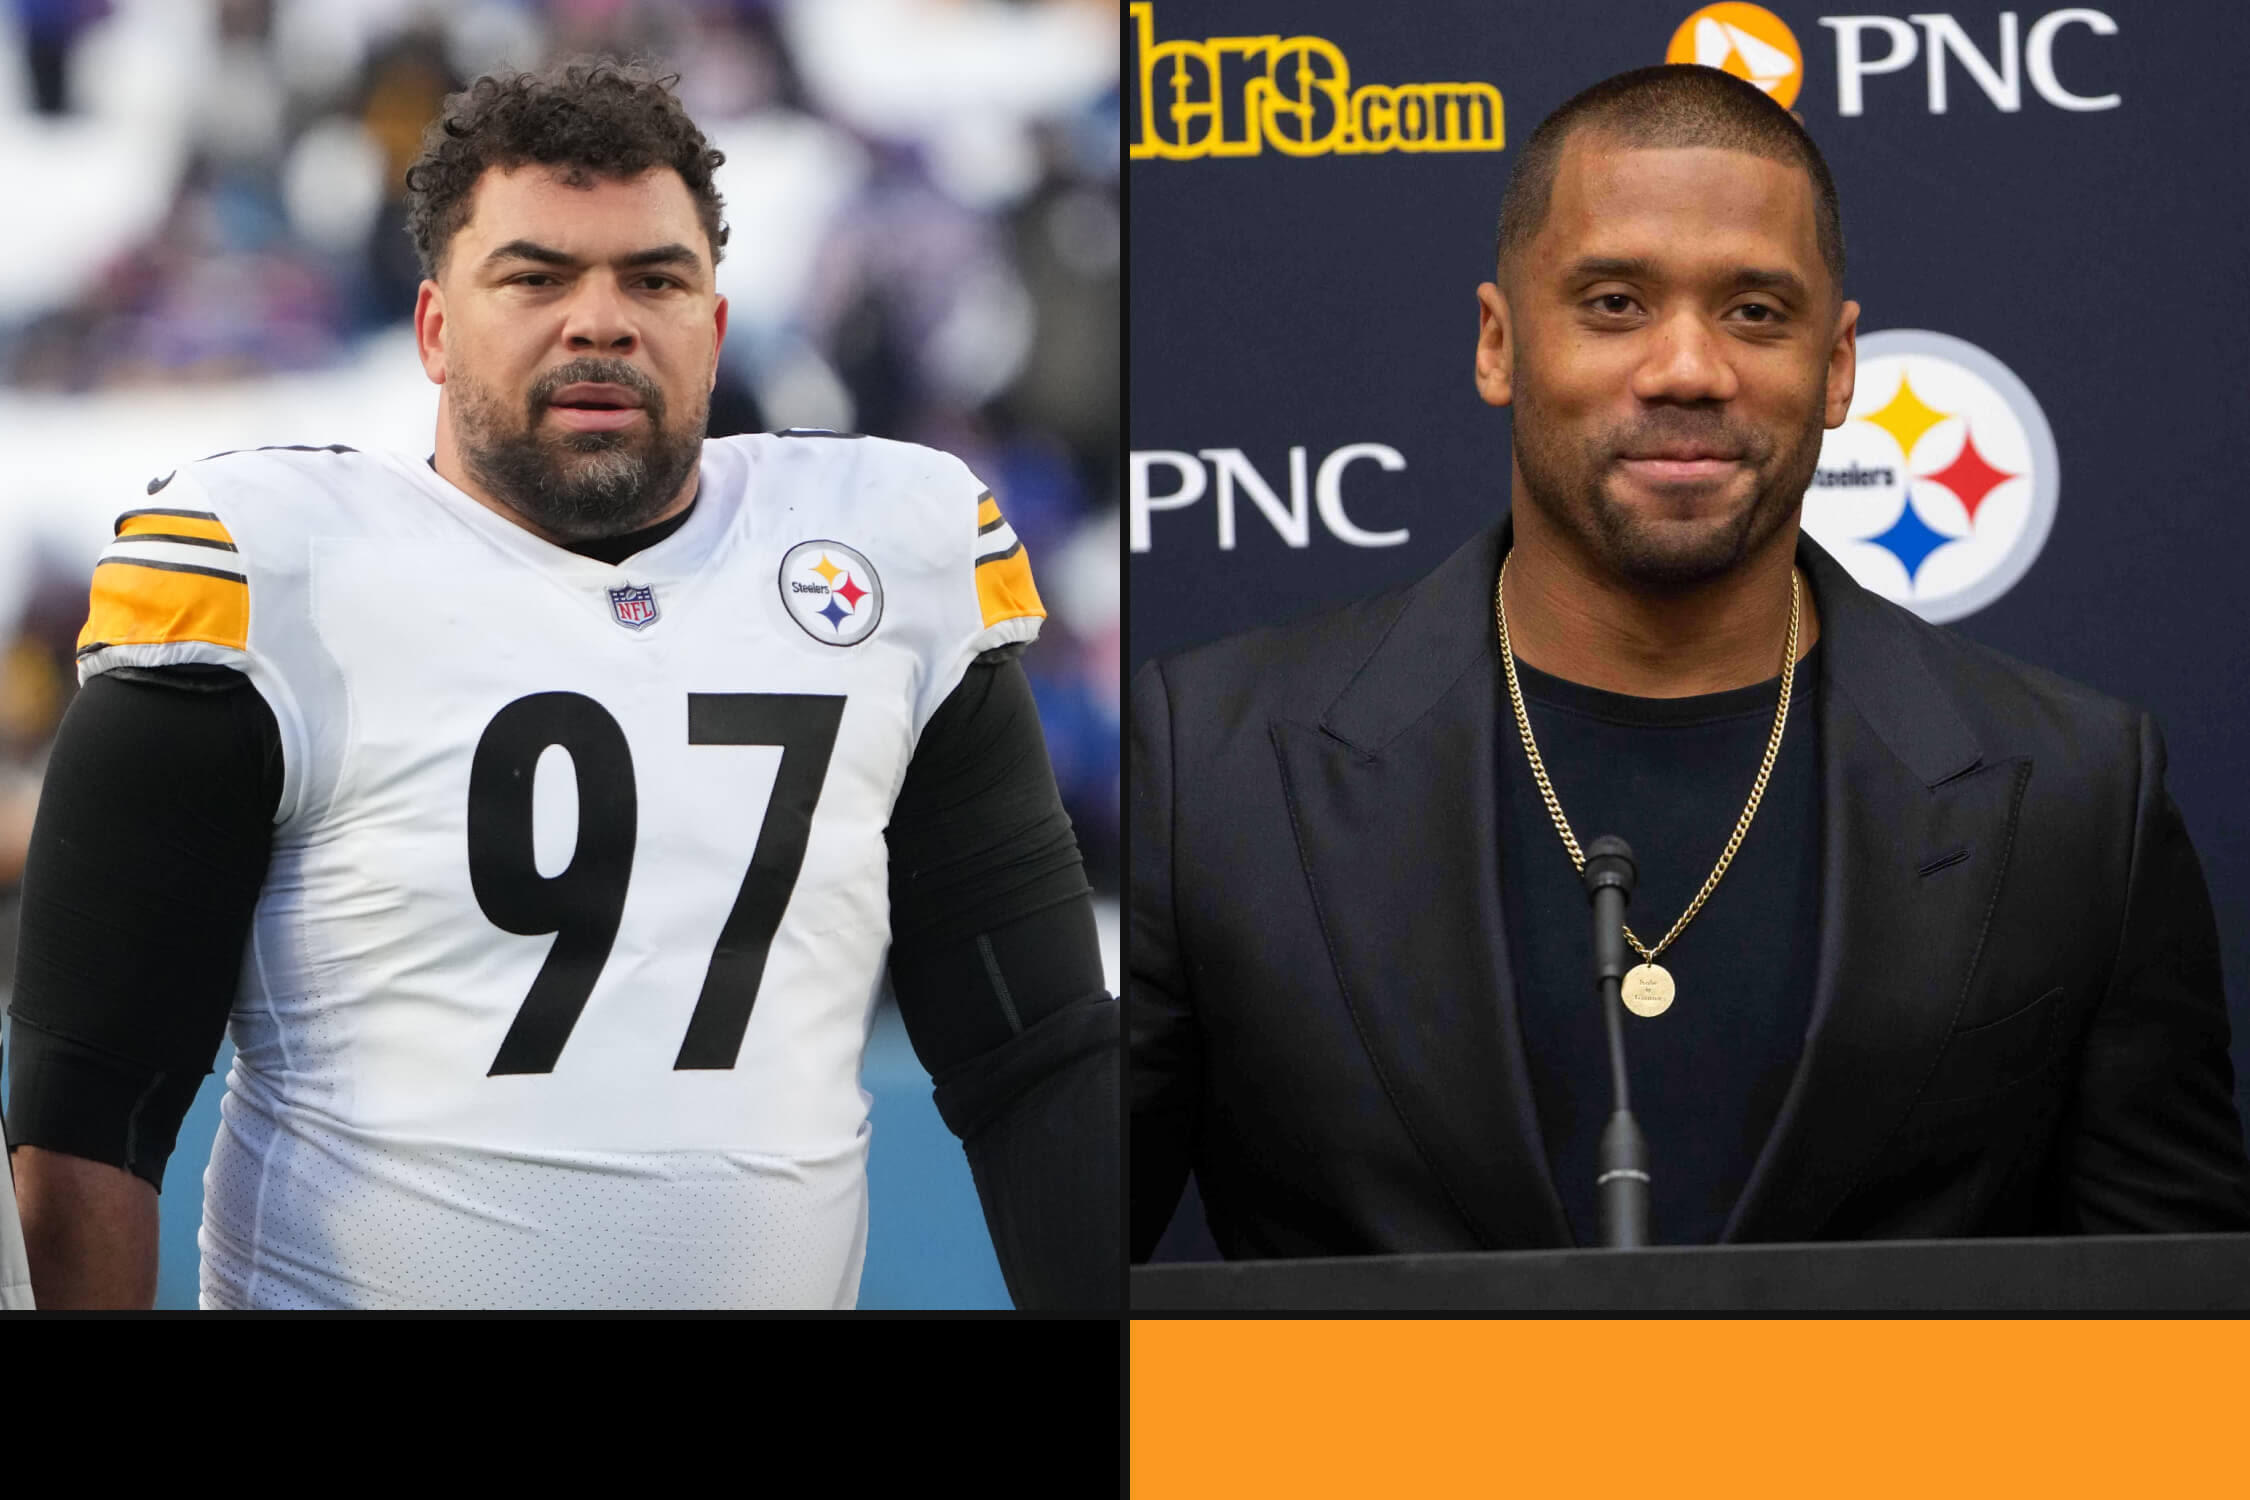 Steelers OTA preview: Cam Heyward's holdout, the QB competition and new offense